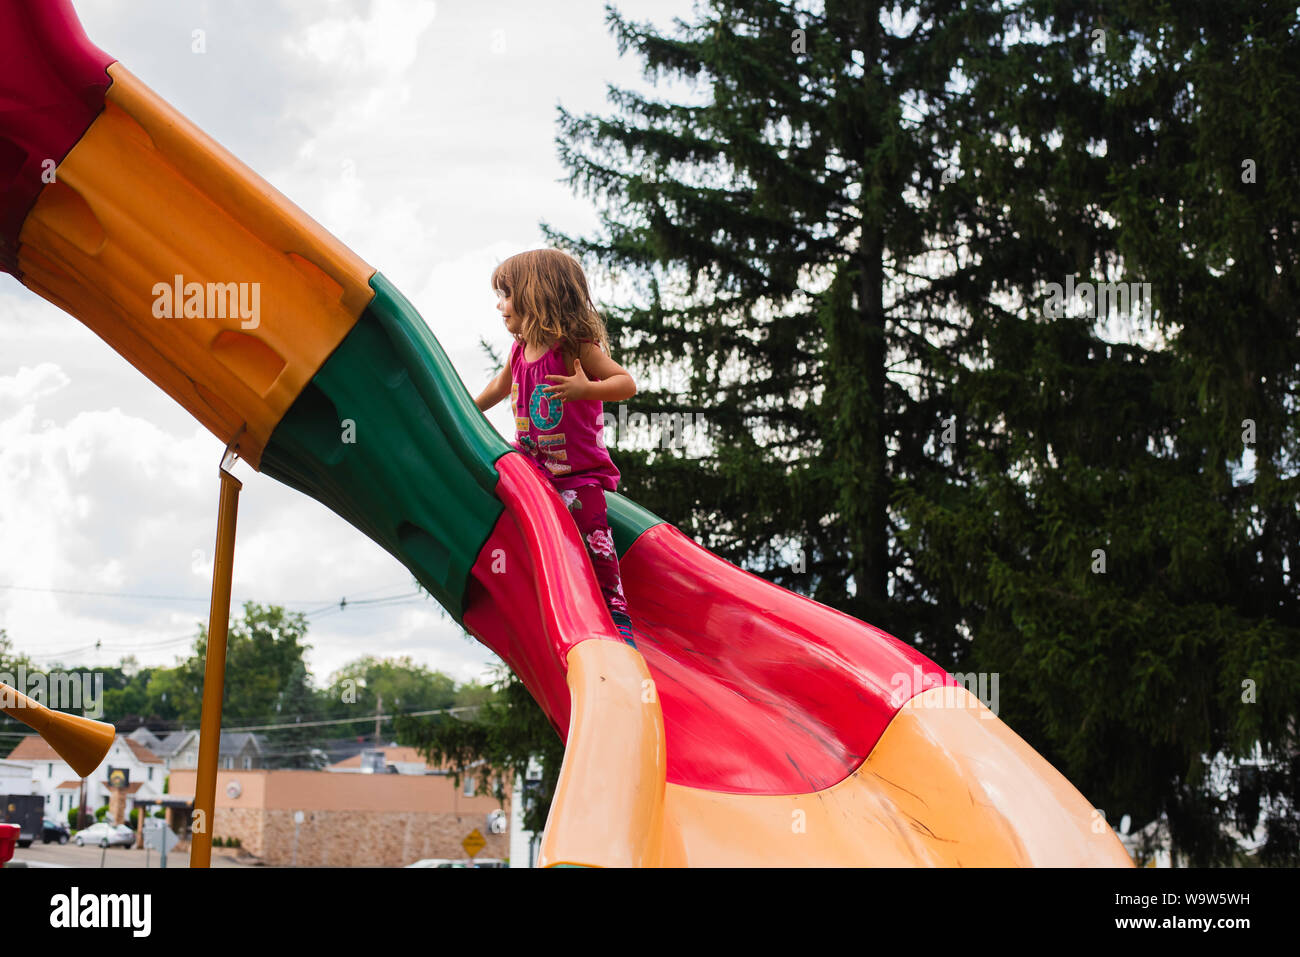 A 4-year old girl on a colorful slide on a playground. Stock Photo